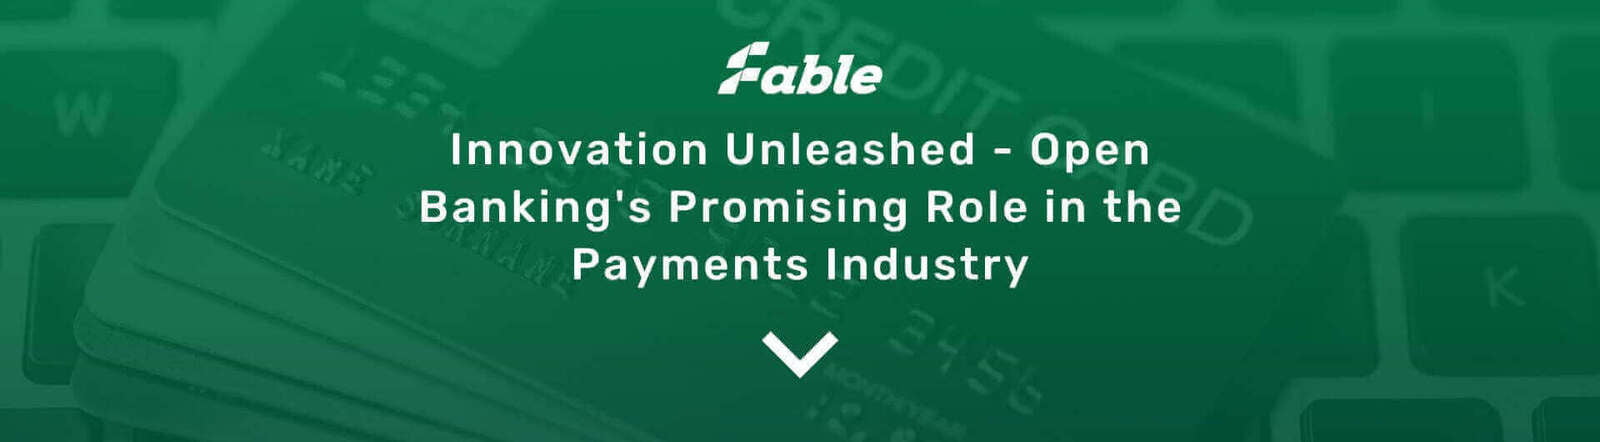 Innovation Unleashed - Open Banking's Promising Role in the Payments Industry